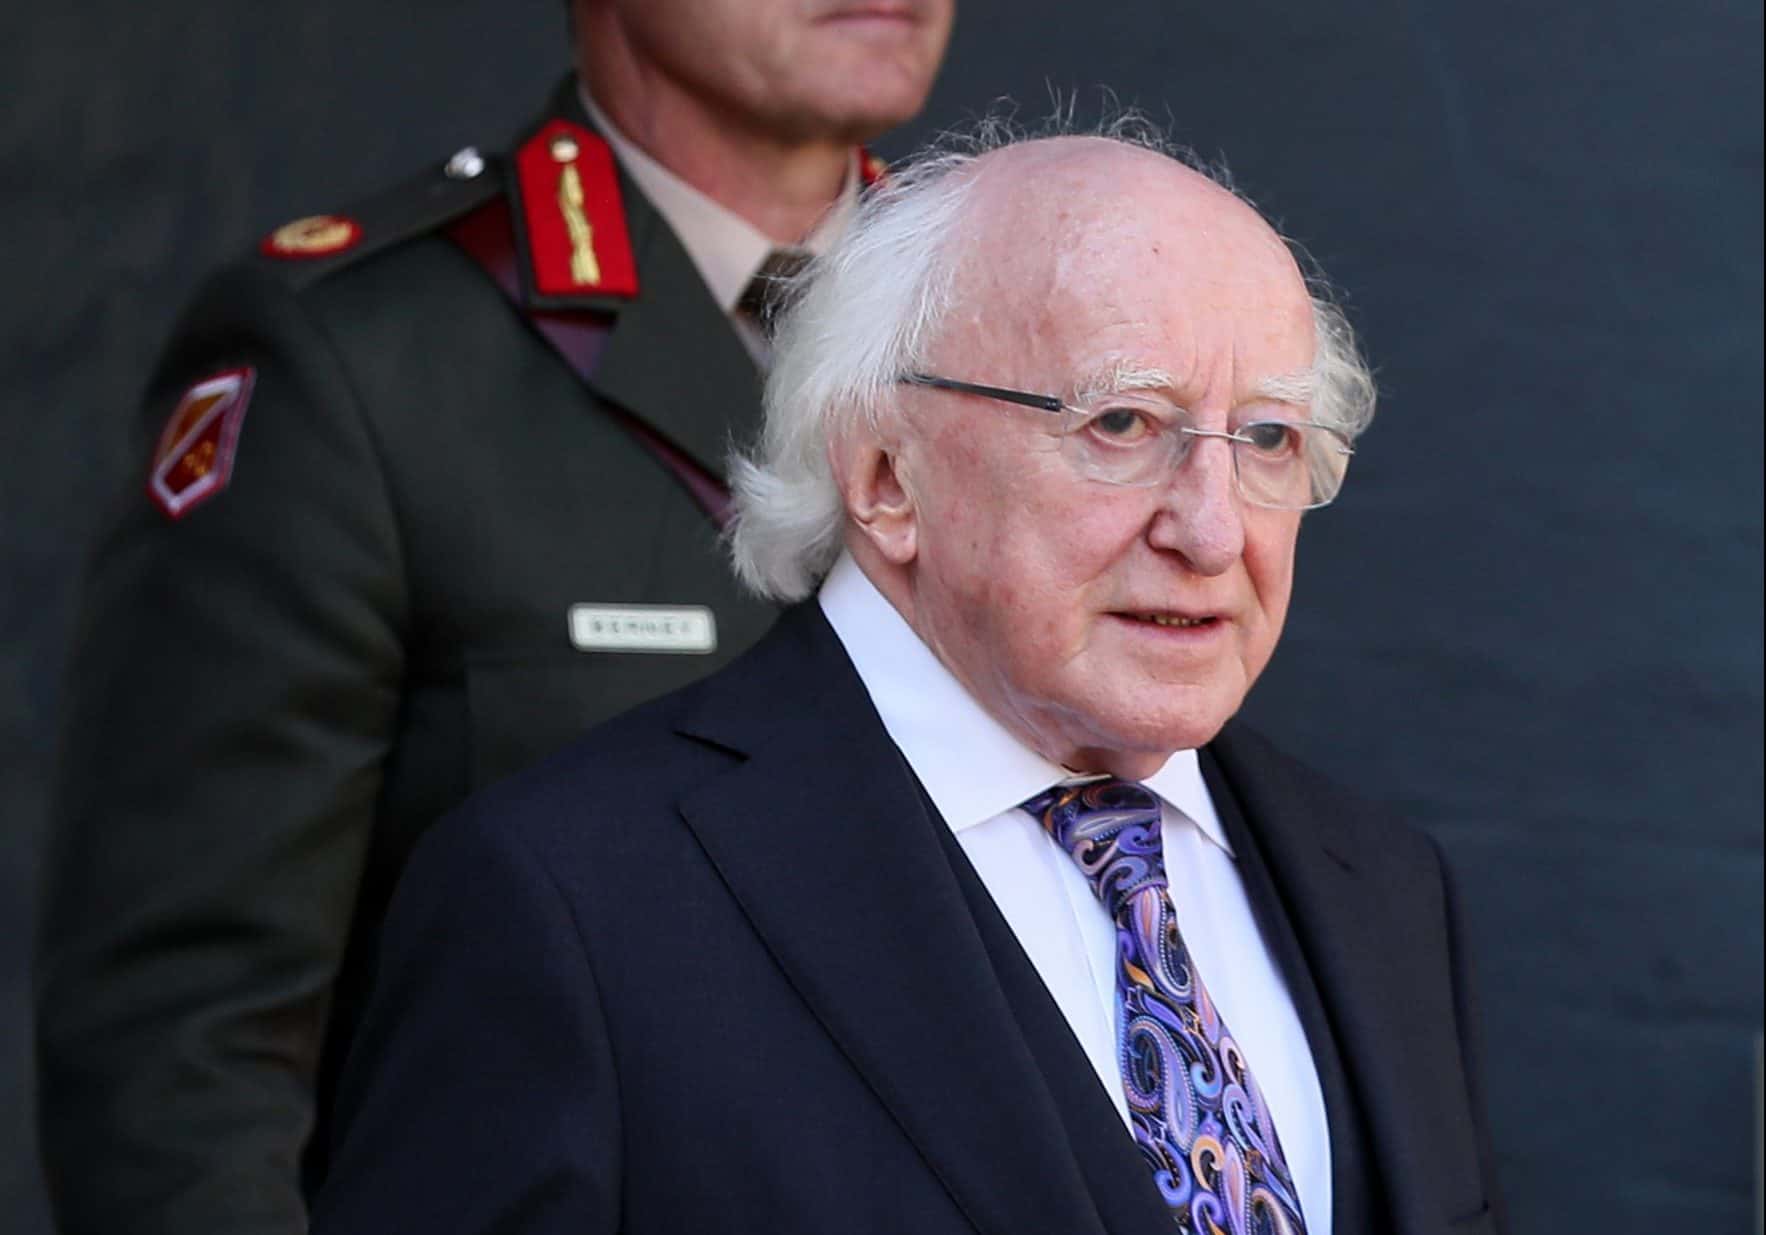 British guilty of ‘feigned amnesia’ over imperial legacy, Irish president says